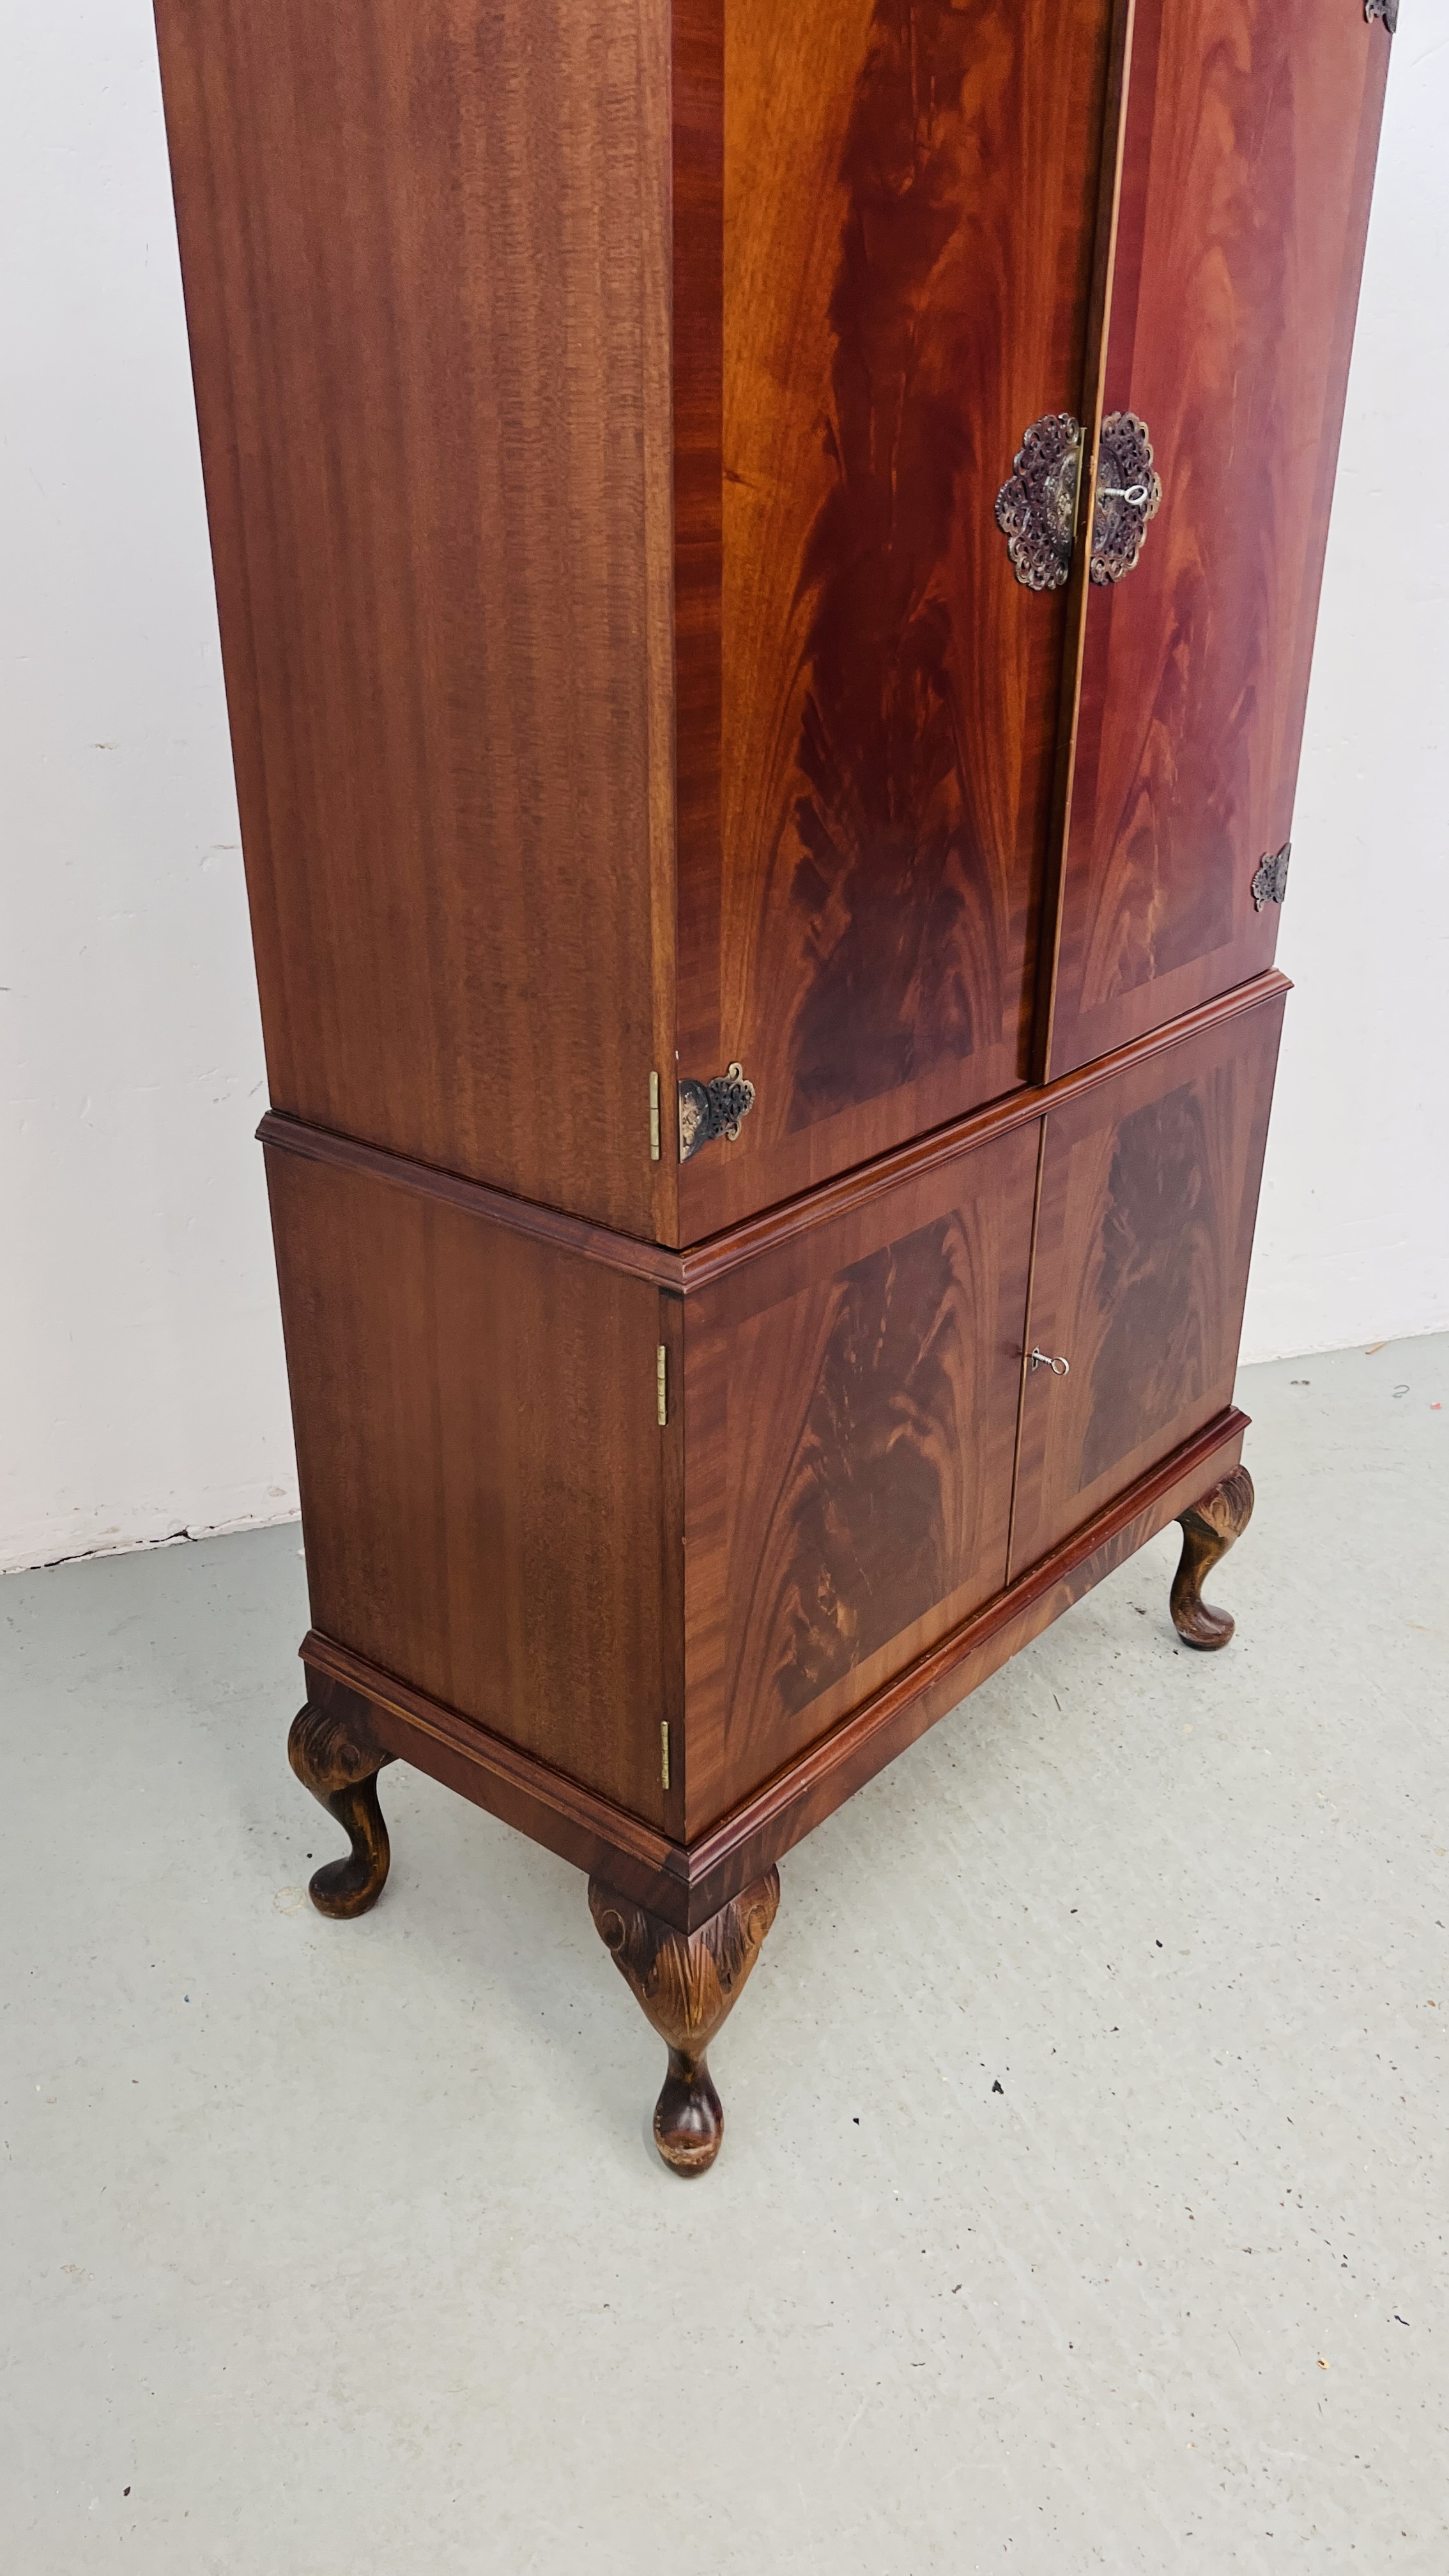 A GOOD QUALITY REPRODUCTION MAHOGANY FINISH DRINKS CABINET WITH MIRRORED INTERIOR STANDING ON - Image 7 of 12